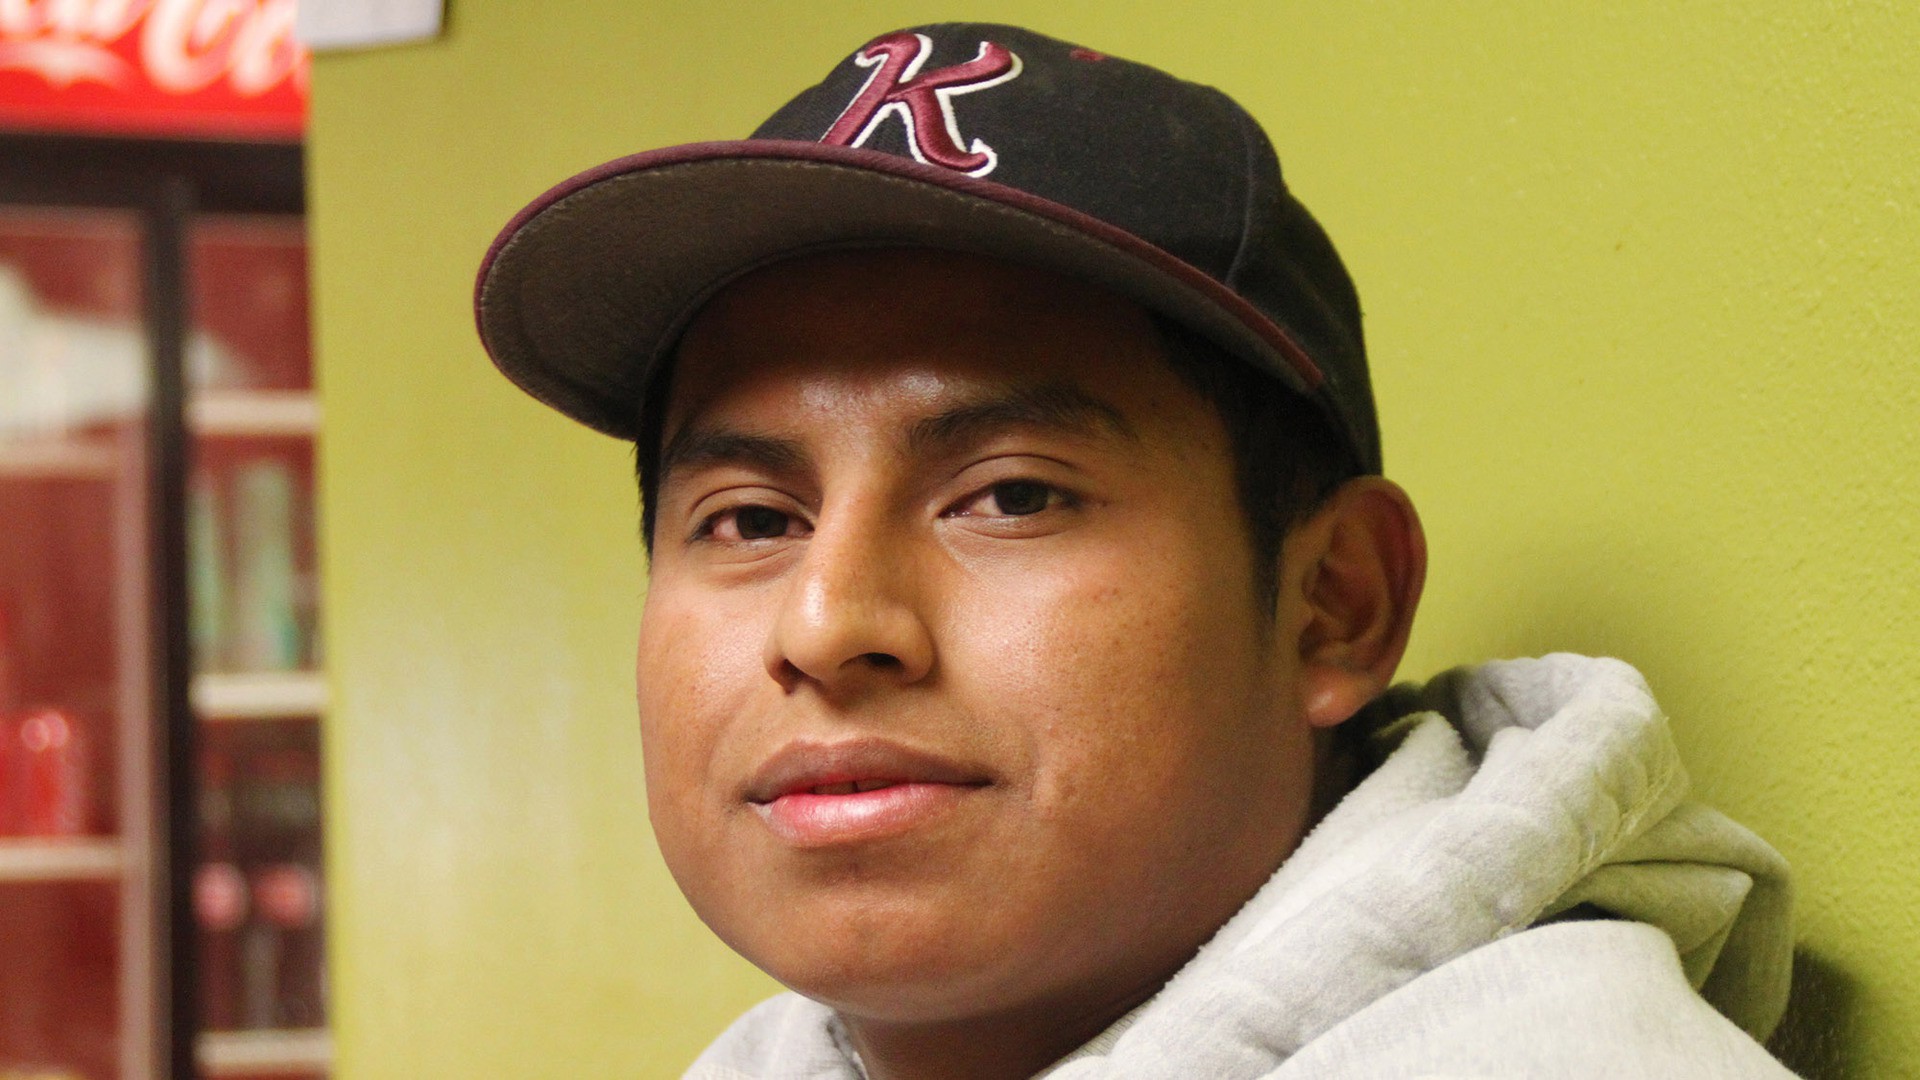 Elias Pérez, 22, emigrated from Guatemala by himself when he was 14. (Photo by Emilie Eaton.)